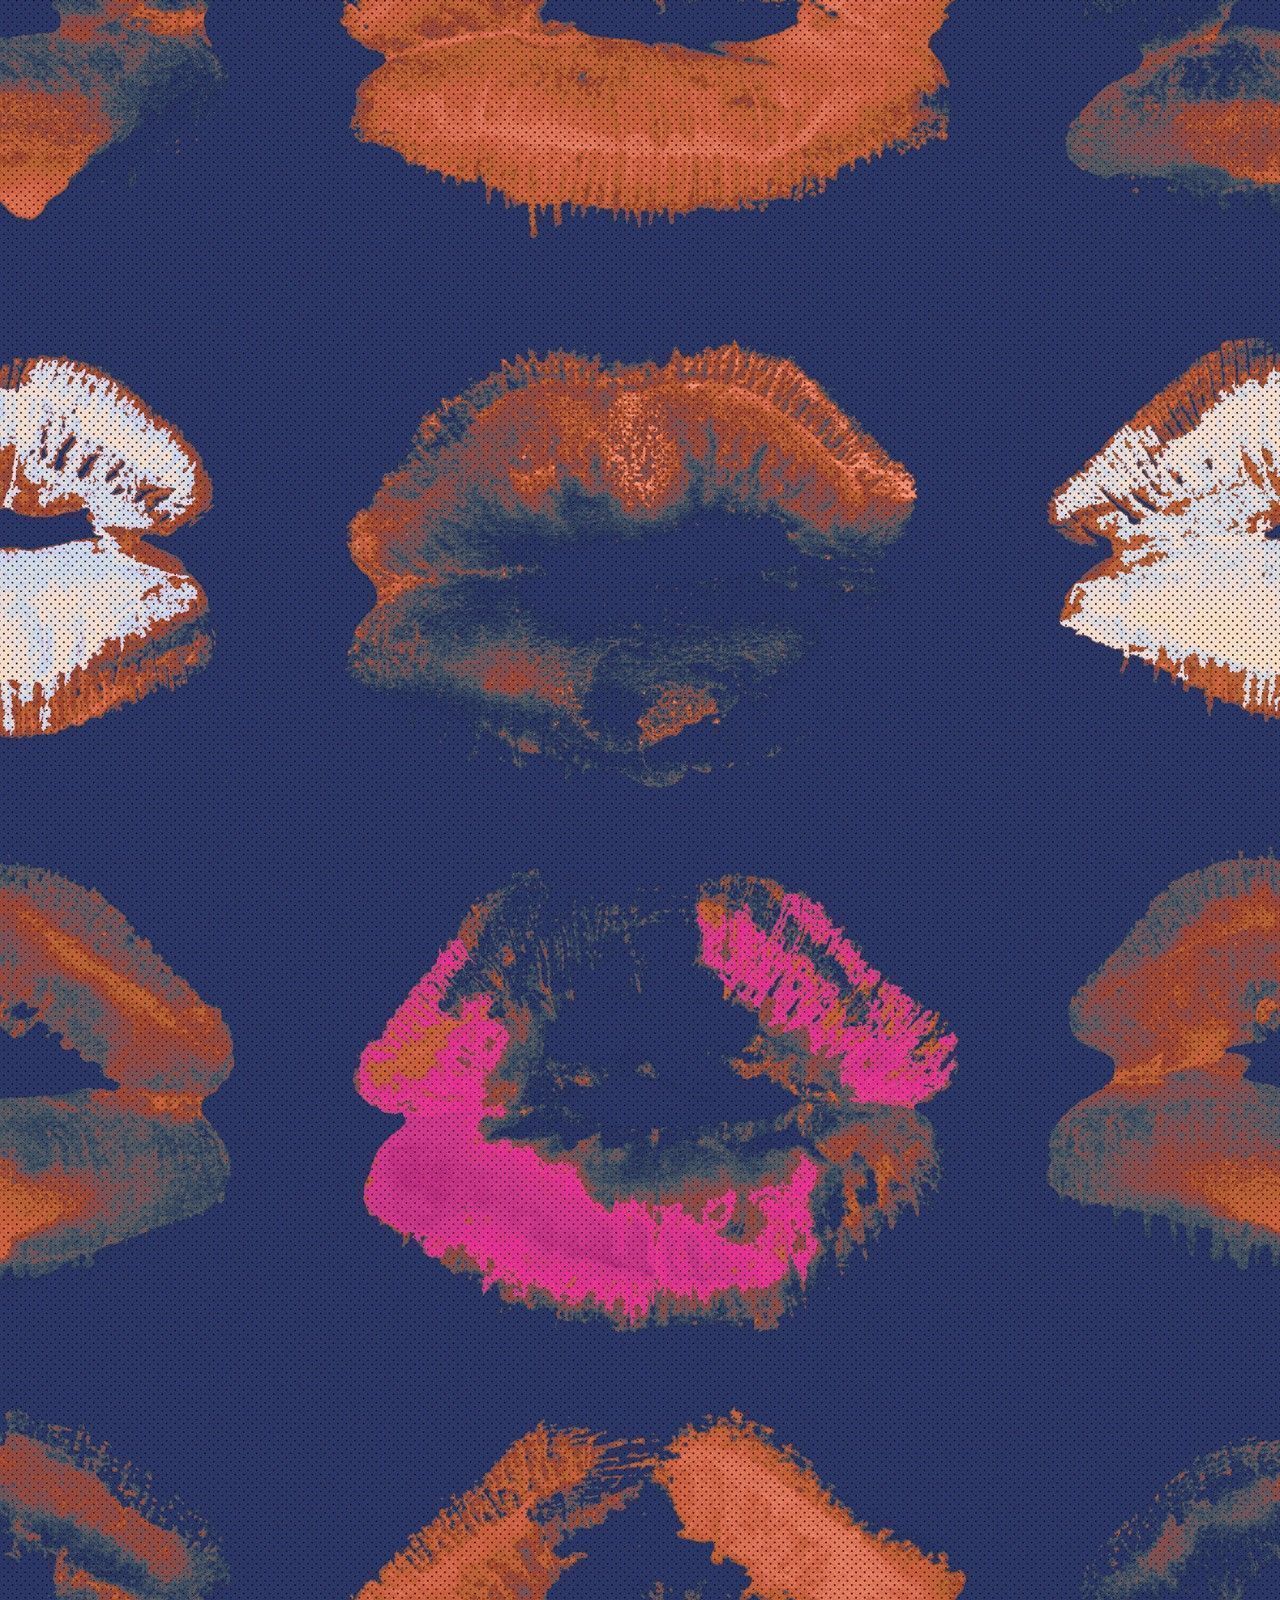 A navy blue wallpaper with a pattern of lips in different shades of red, pink, and orange. - Indigo, neon orange